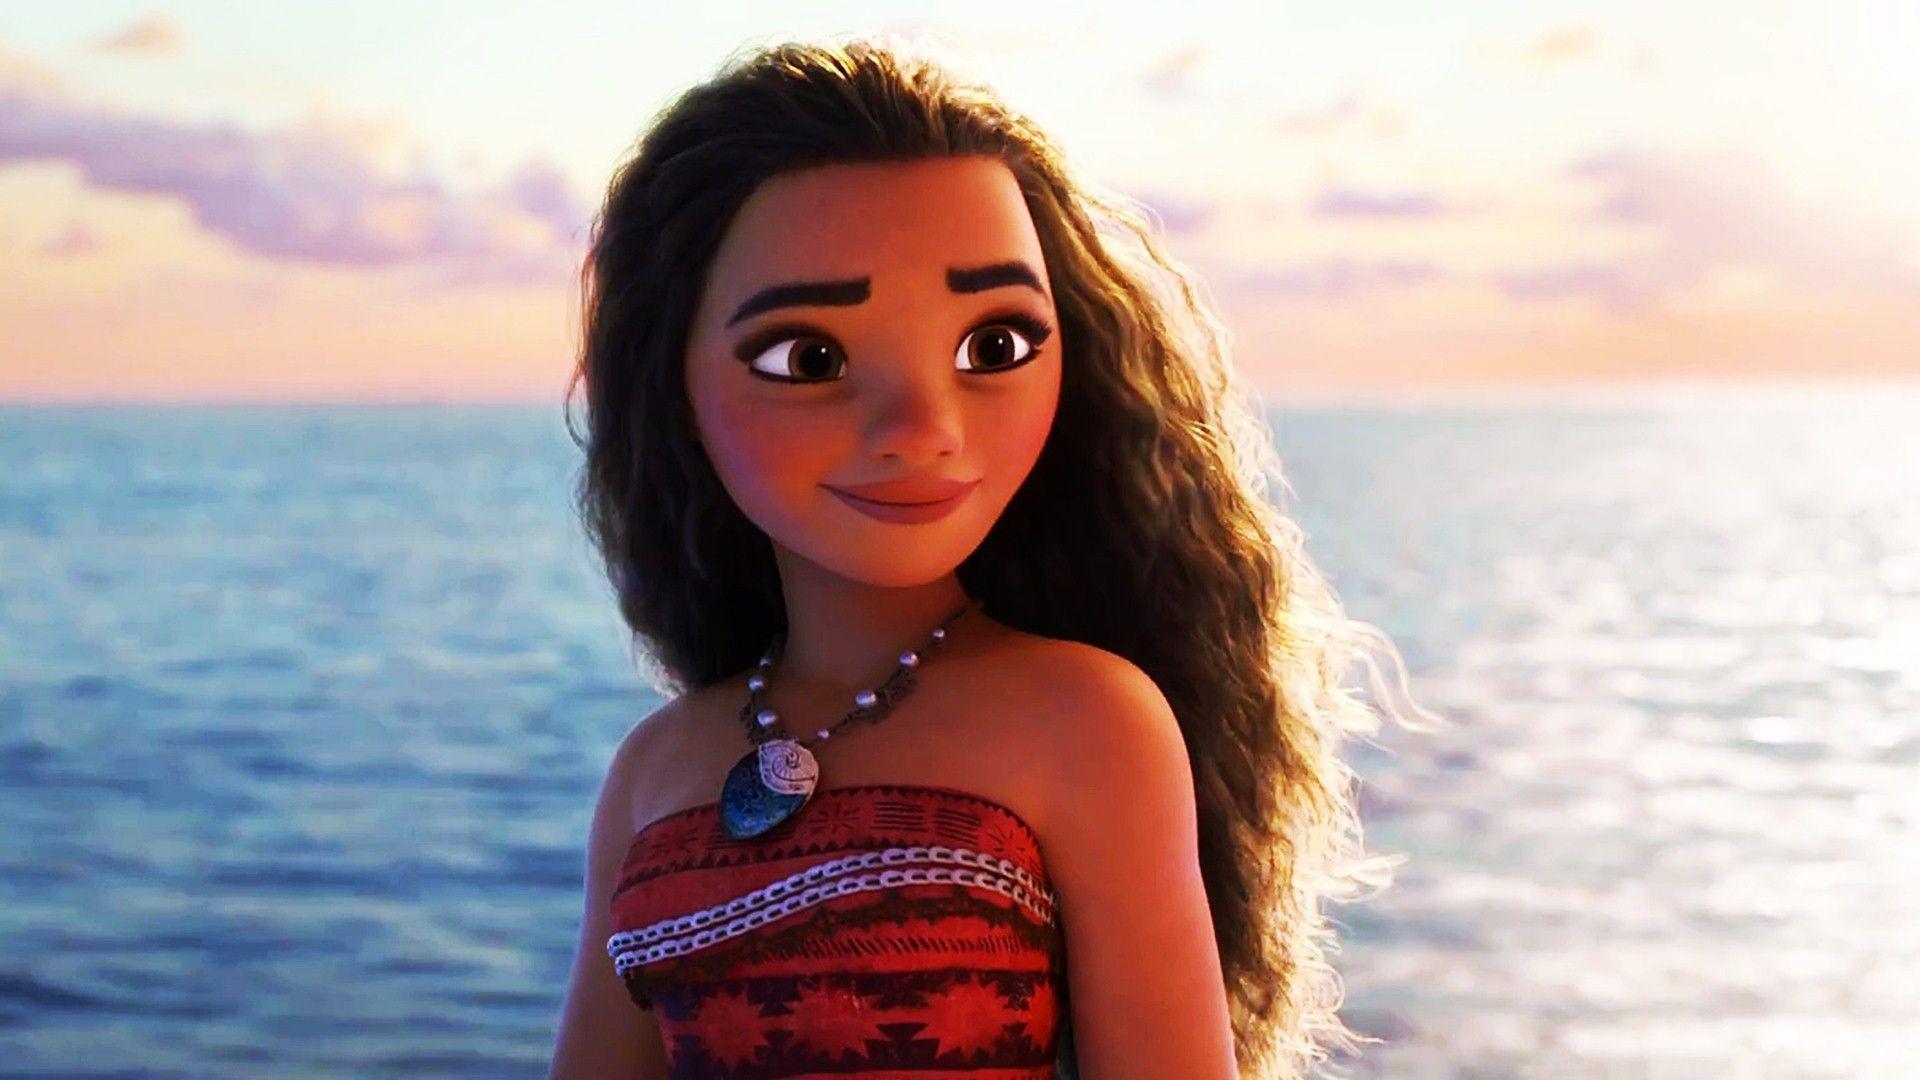 Moana Wallpapers HD Backgrounds, Image, Pics, Photos Free